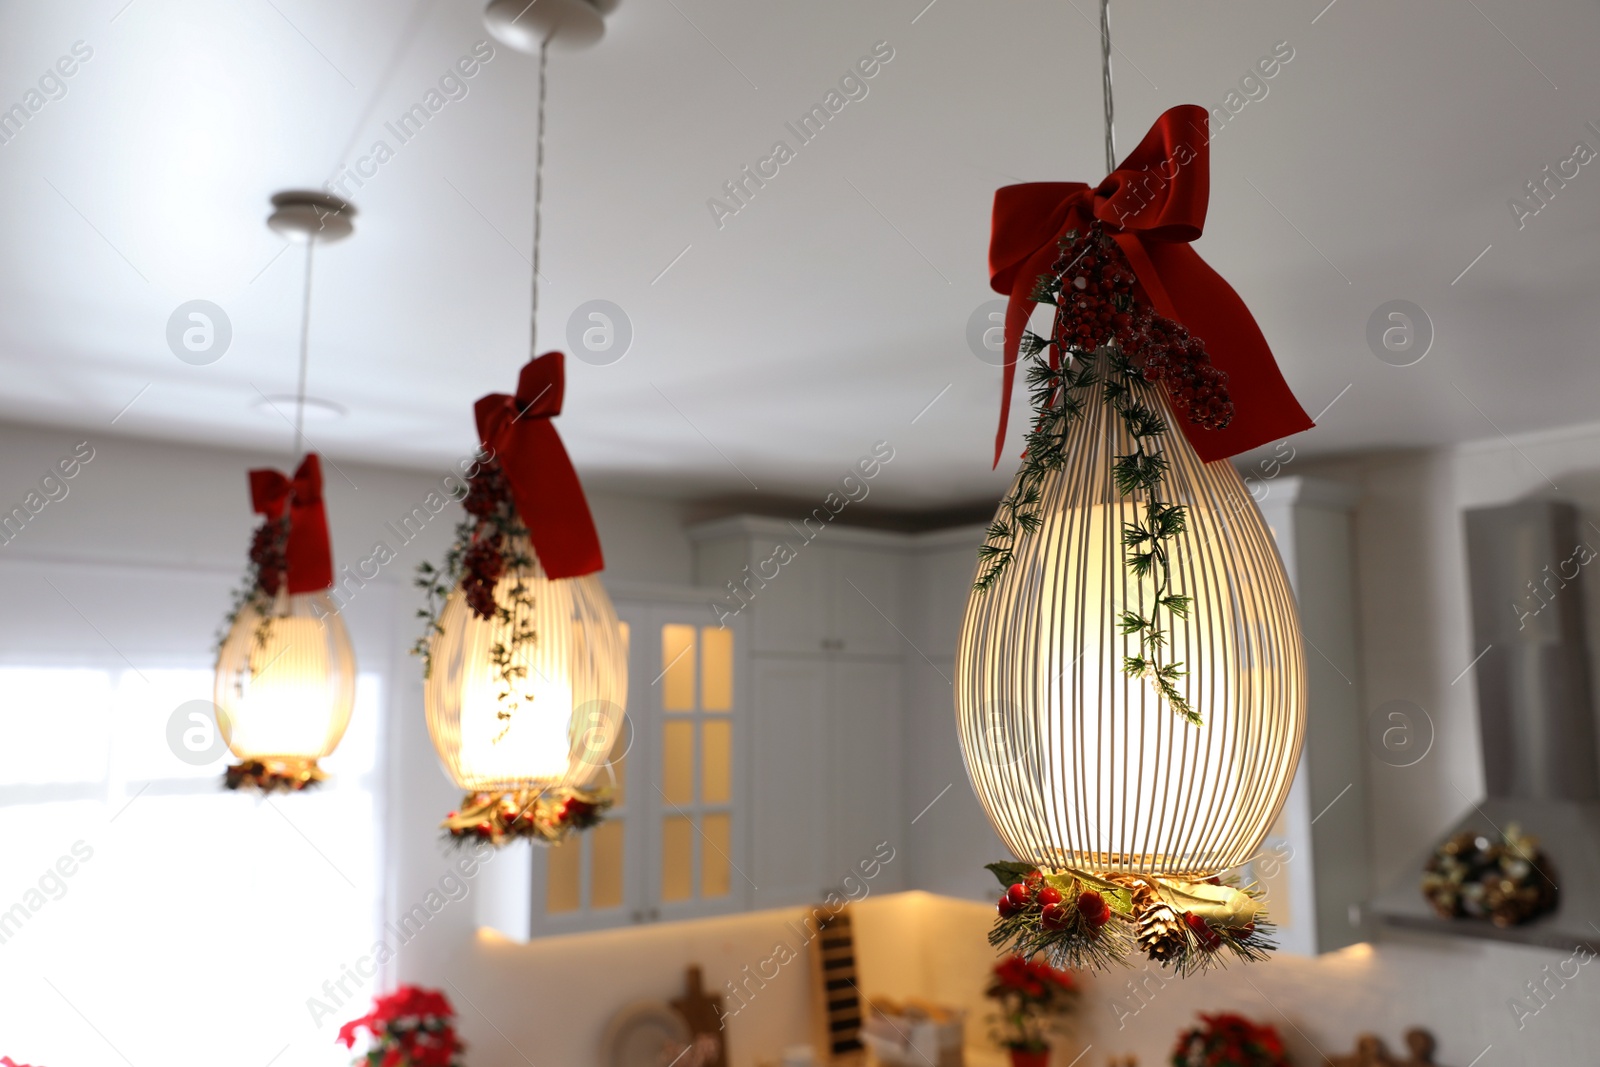 Photo of Hanging lamps decorated for Christmas indoors. Interior design